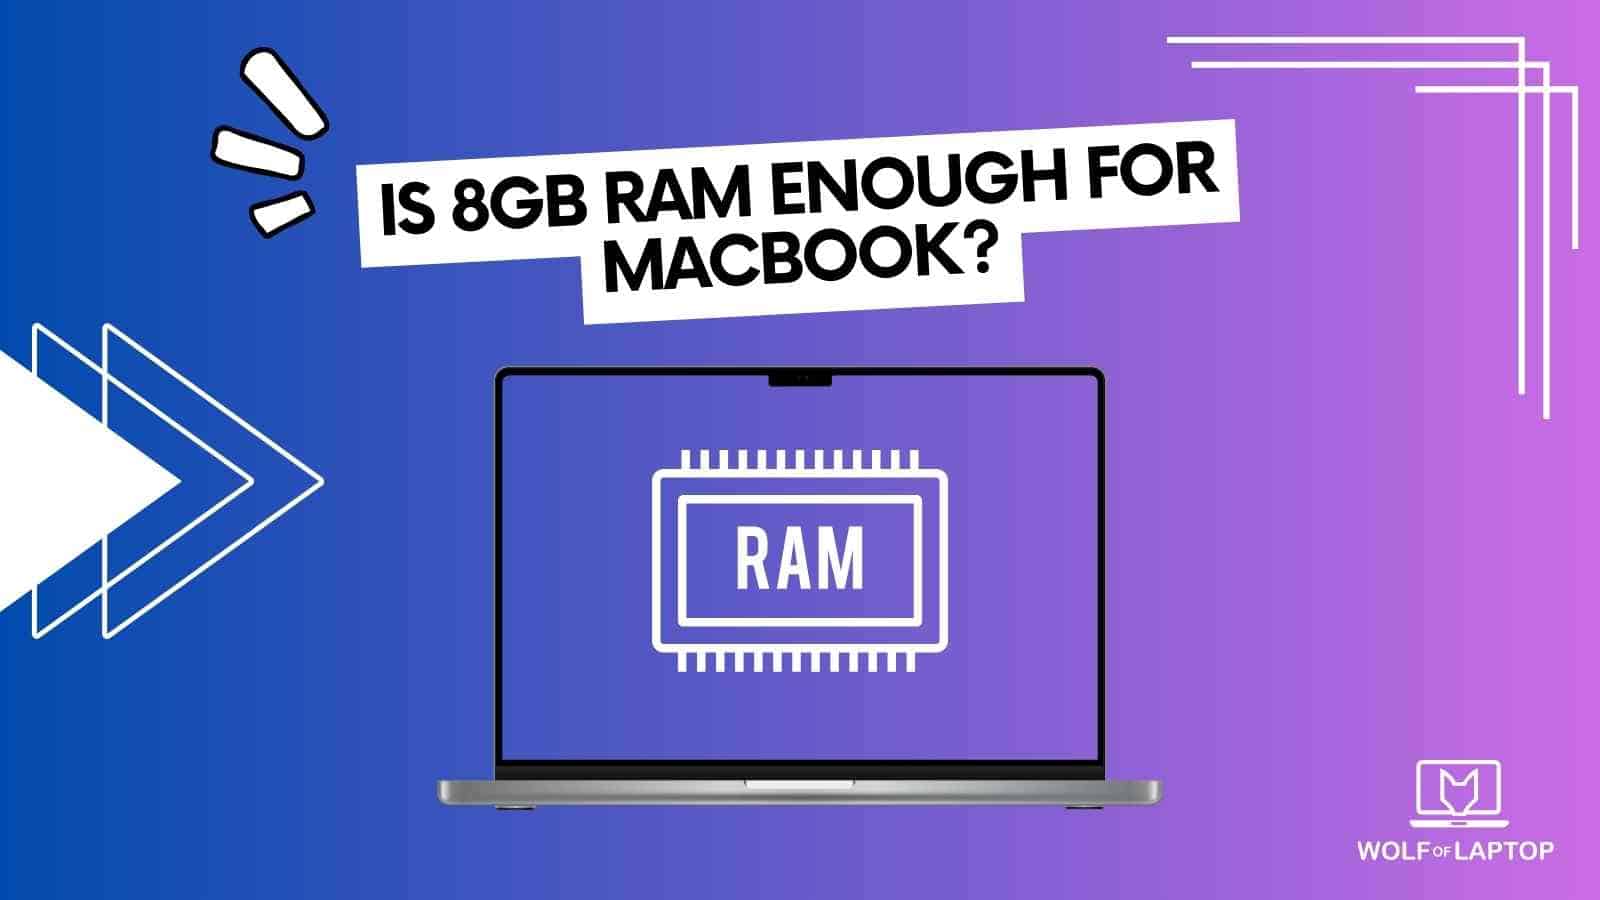 is 8 gb enough RAM for macbook laptops?